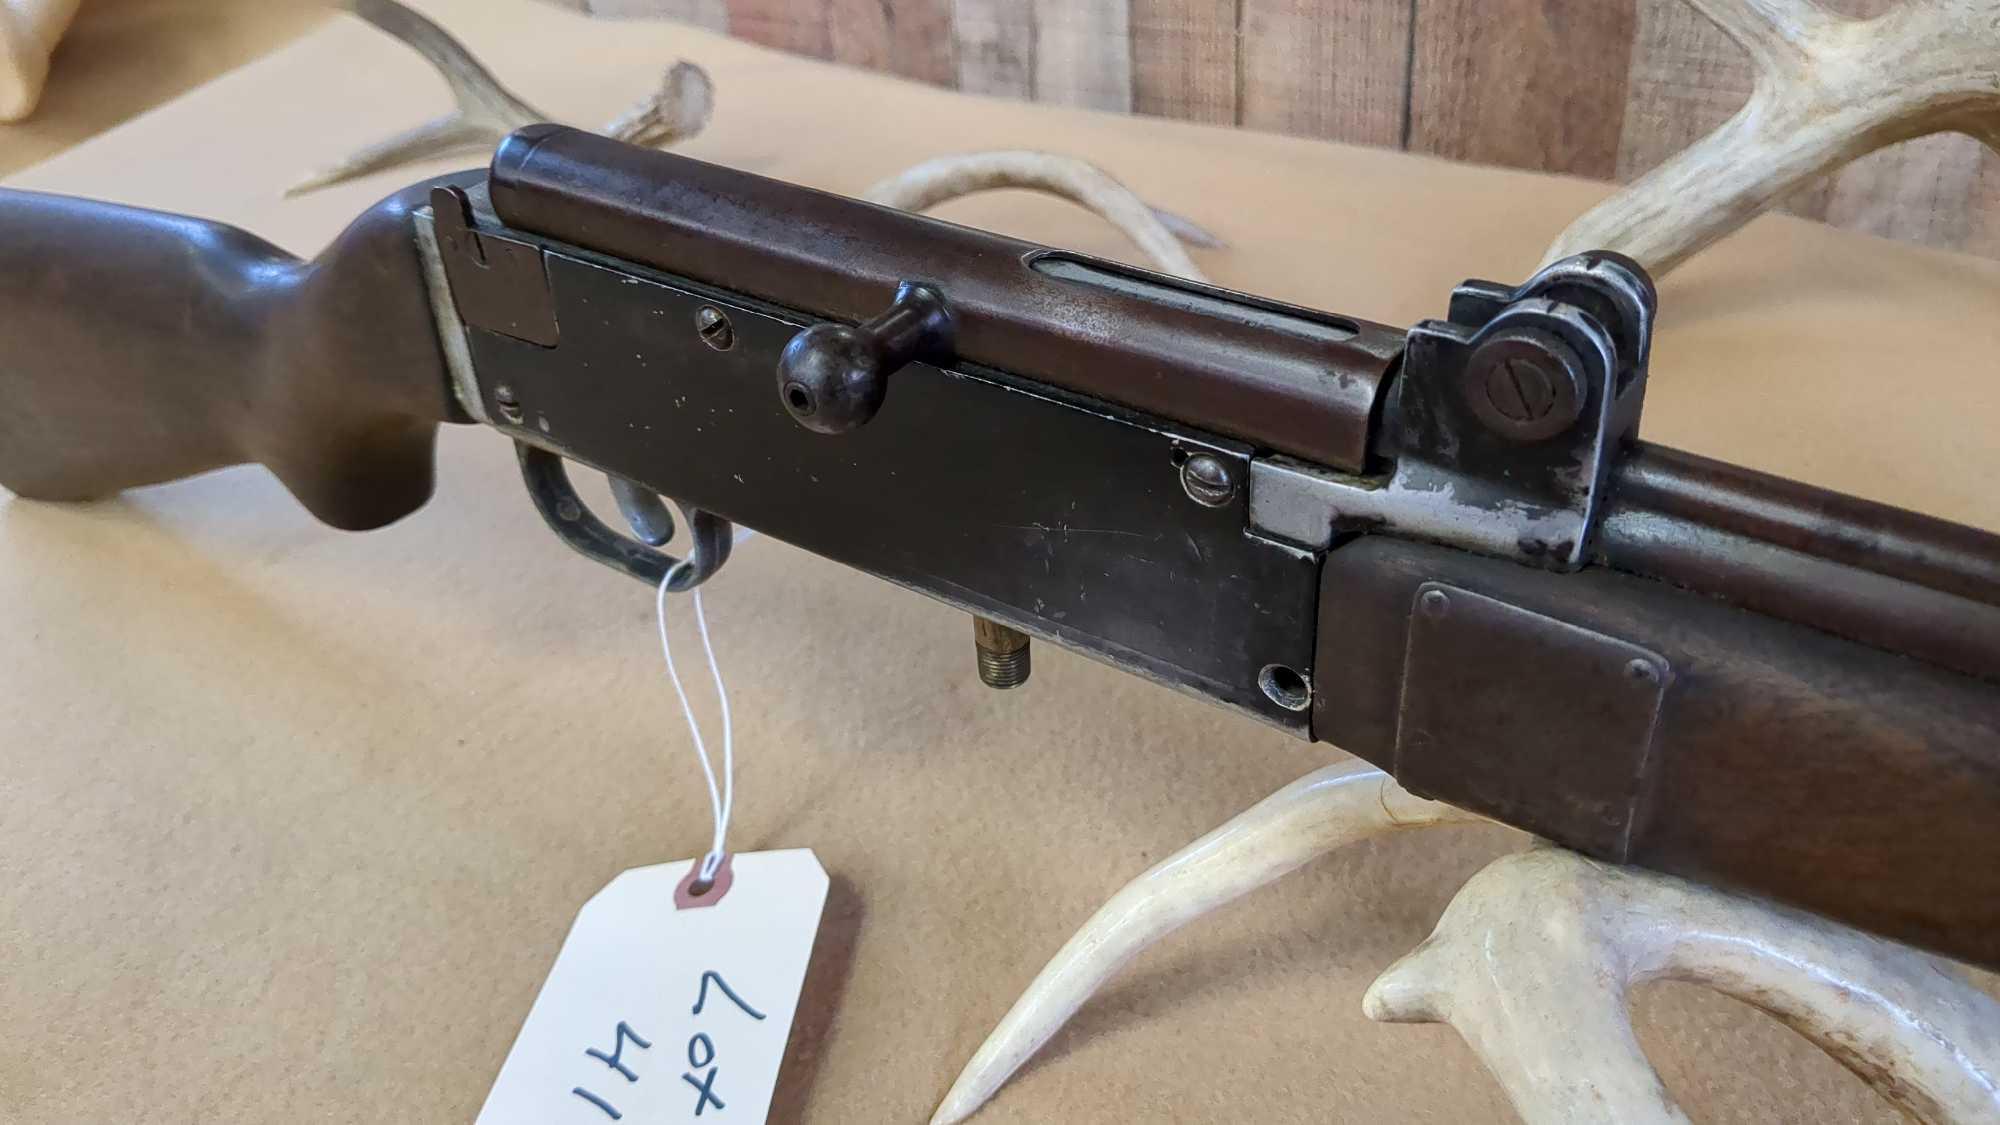 A.B.T. MOUNTAINERING PNEUMATIC .22 CAL RIFLE | 1942-1949